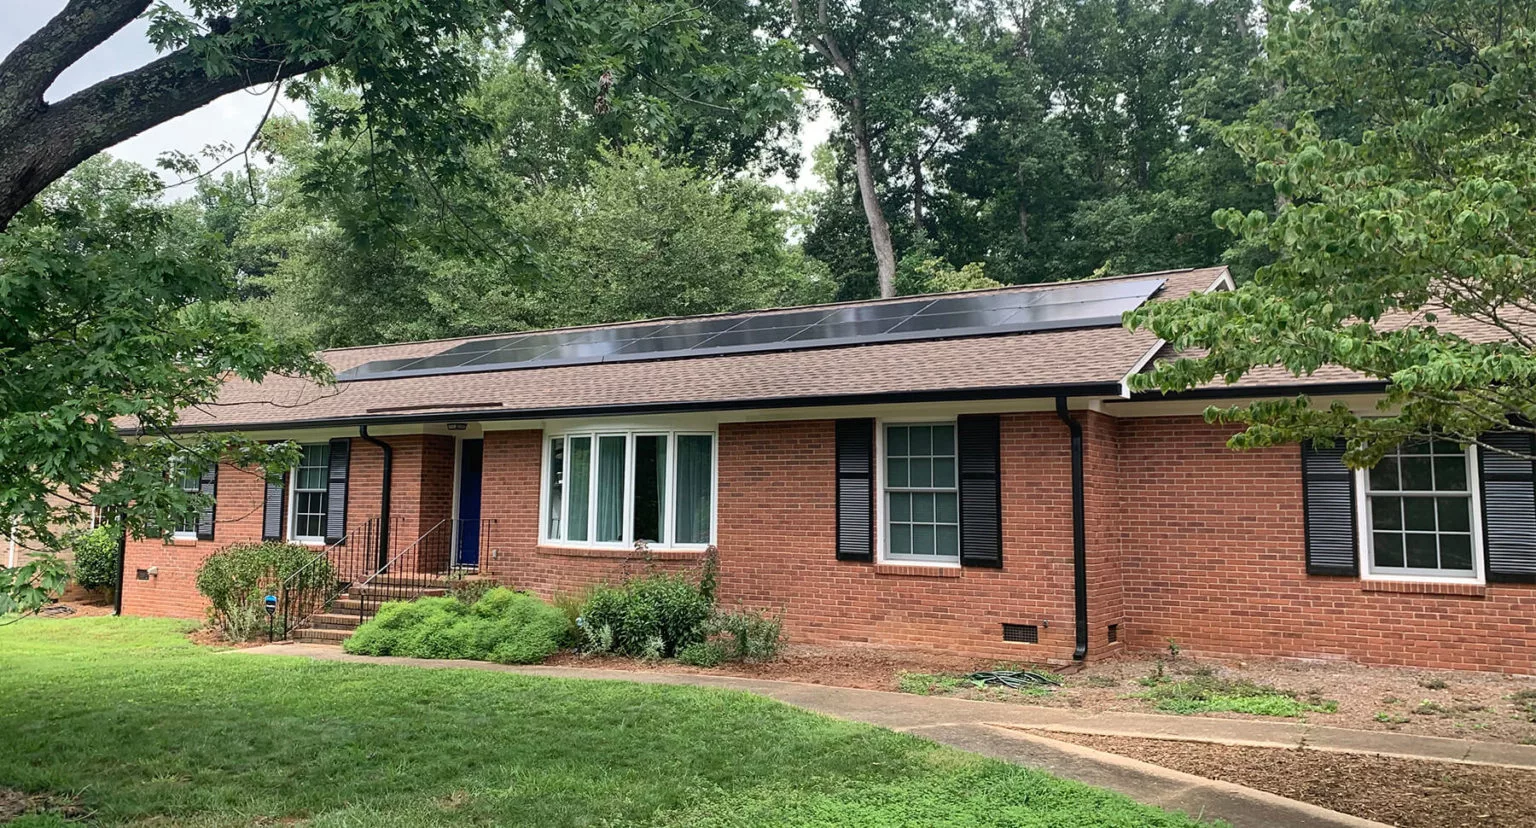 Single story brick home with a solar system on the front of the roof